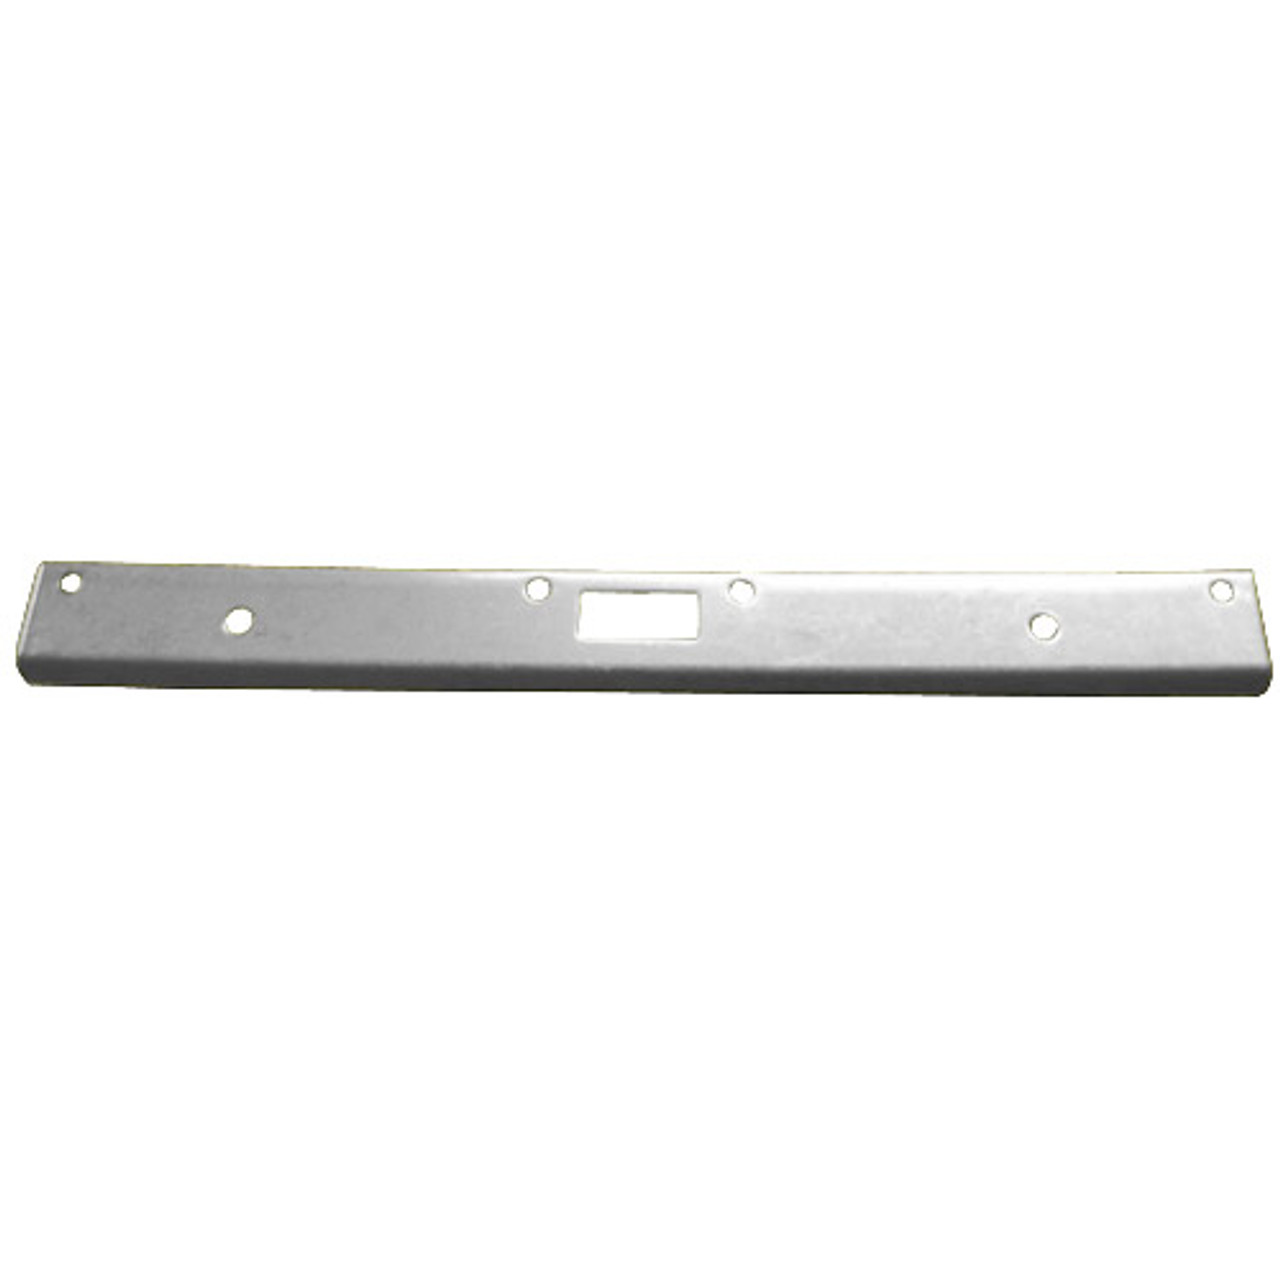 AST-21381-SL Don Jo 18" Security Strike Plate in Silver Coated Finish